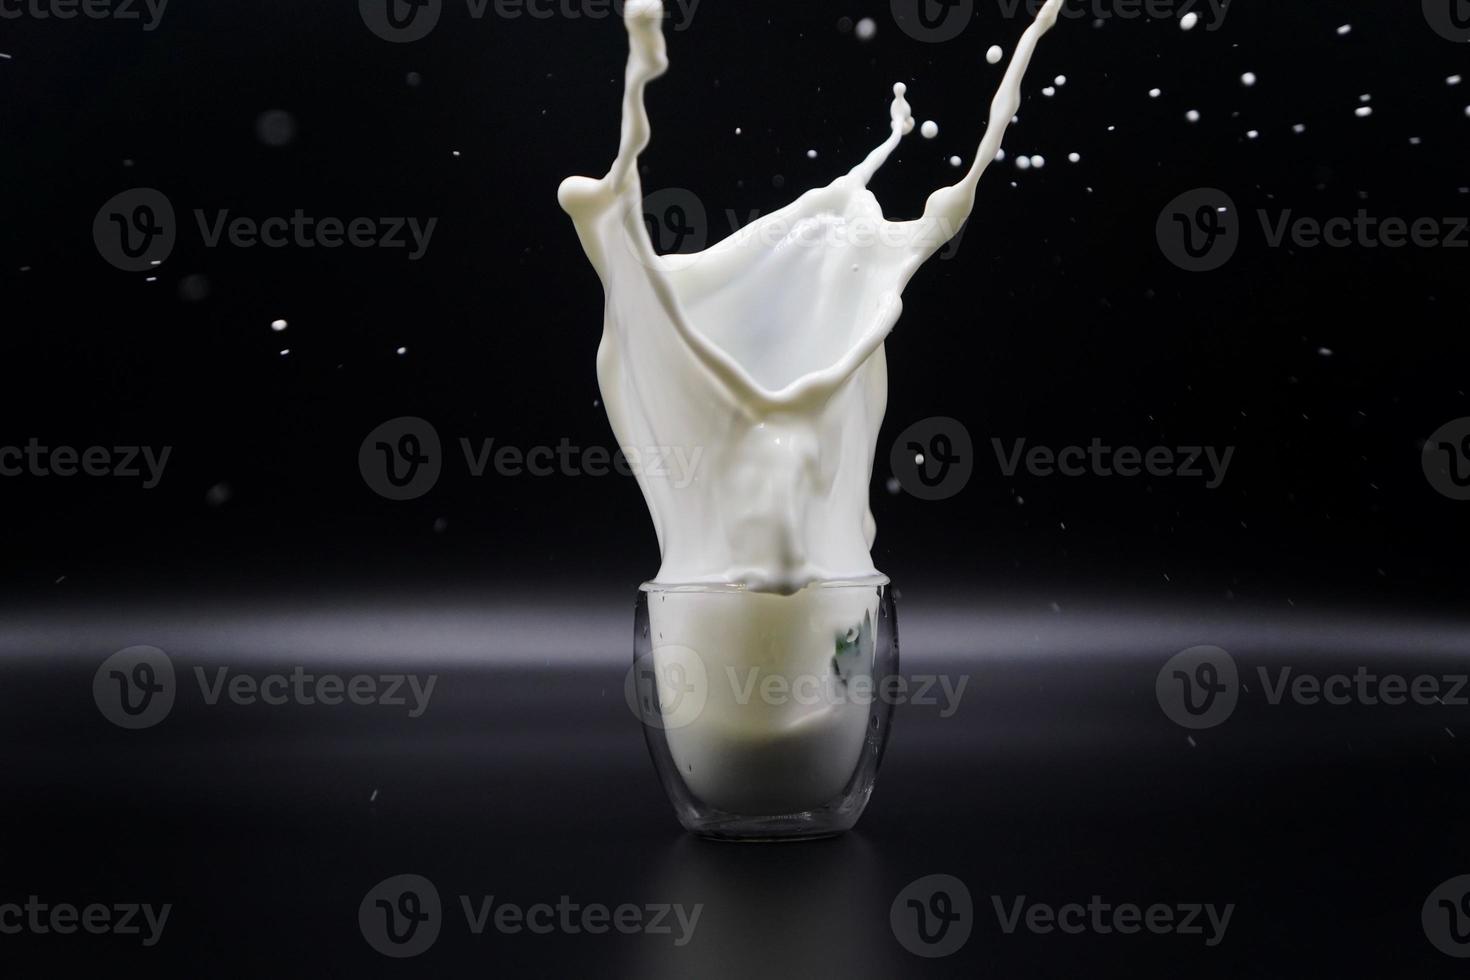 A strawberry dropping into a glass of milk caused milk splash on the black background photo